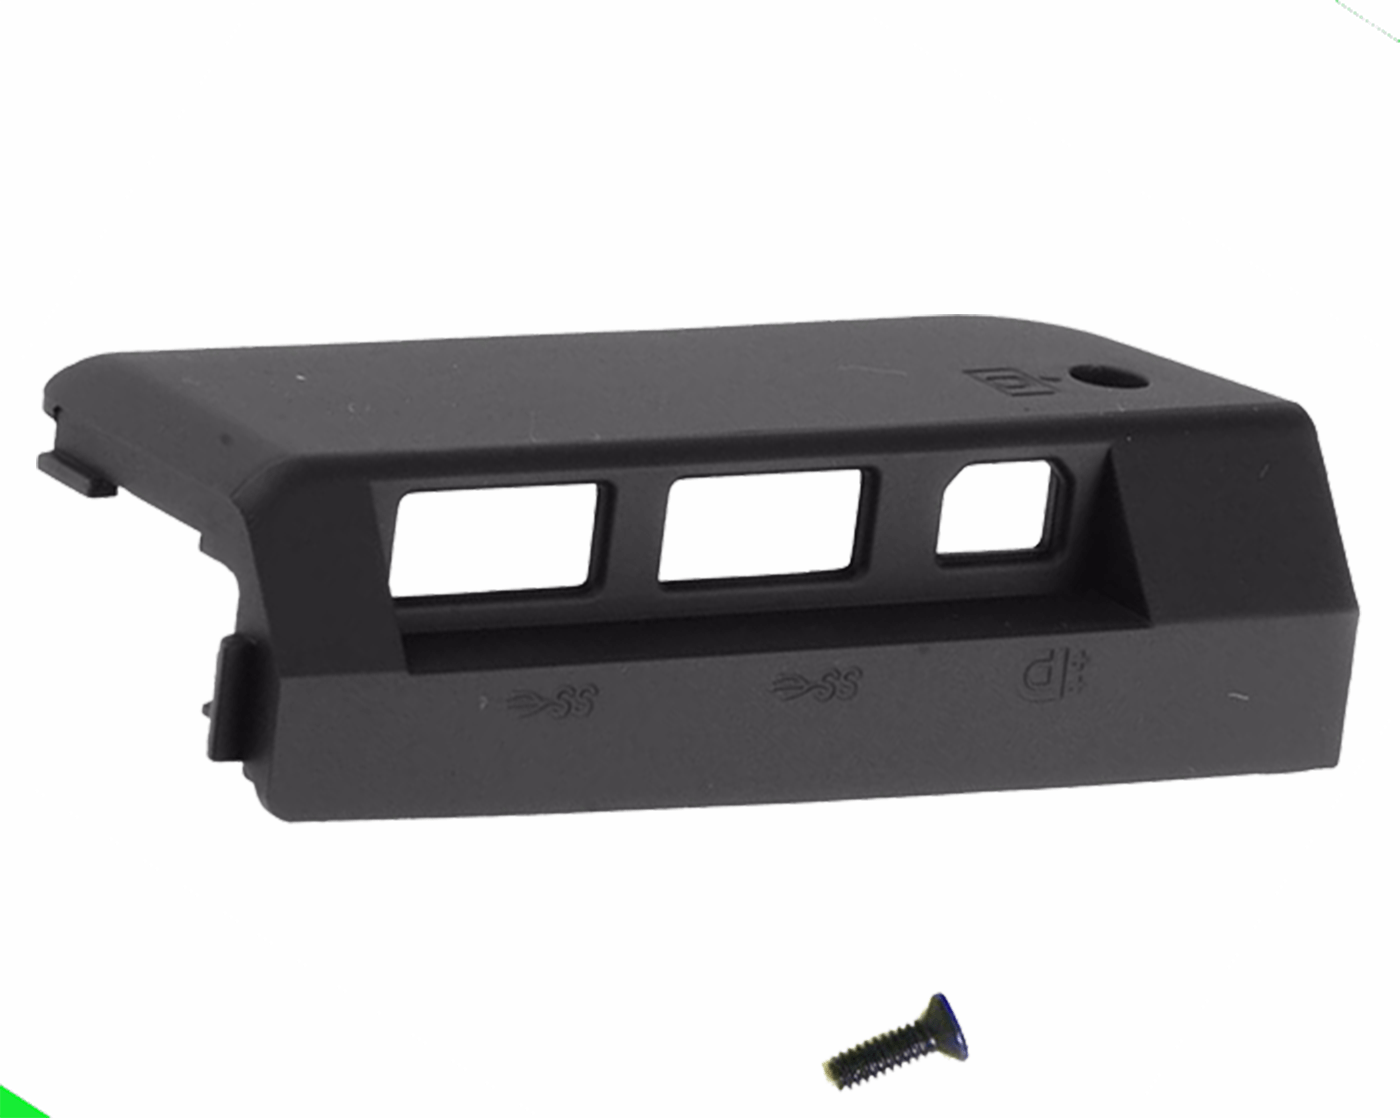 Lenovo ThinkPad T430 HDD Cover Door and Screw